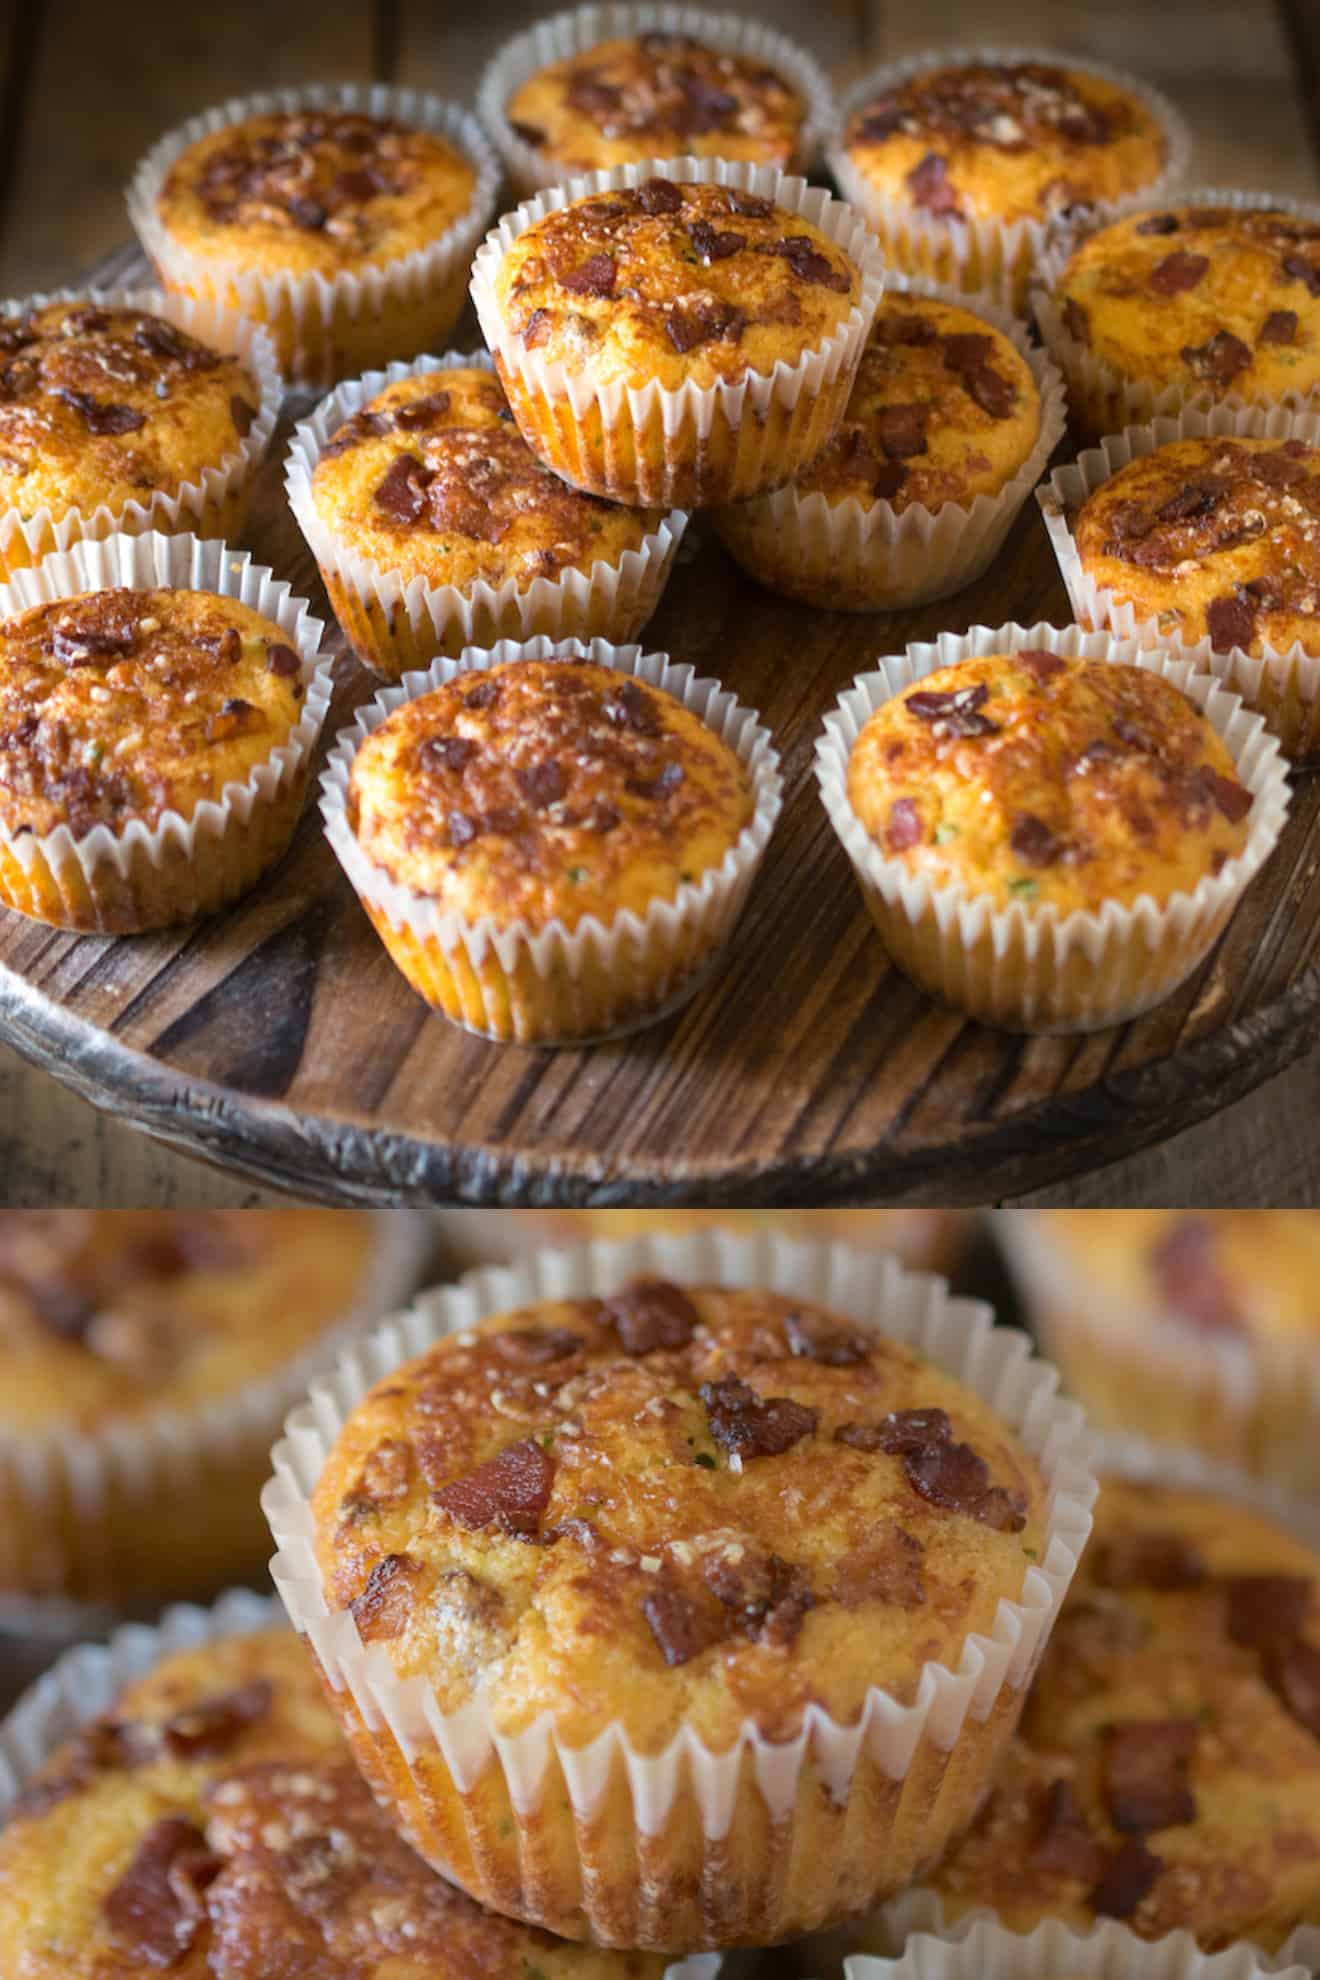 Muffins stacked on a serving board and a closeup